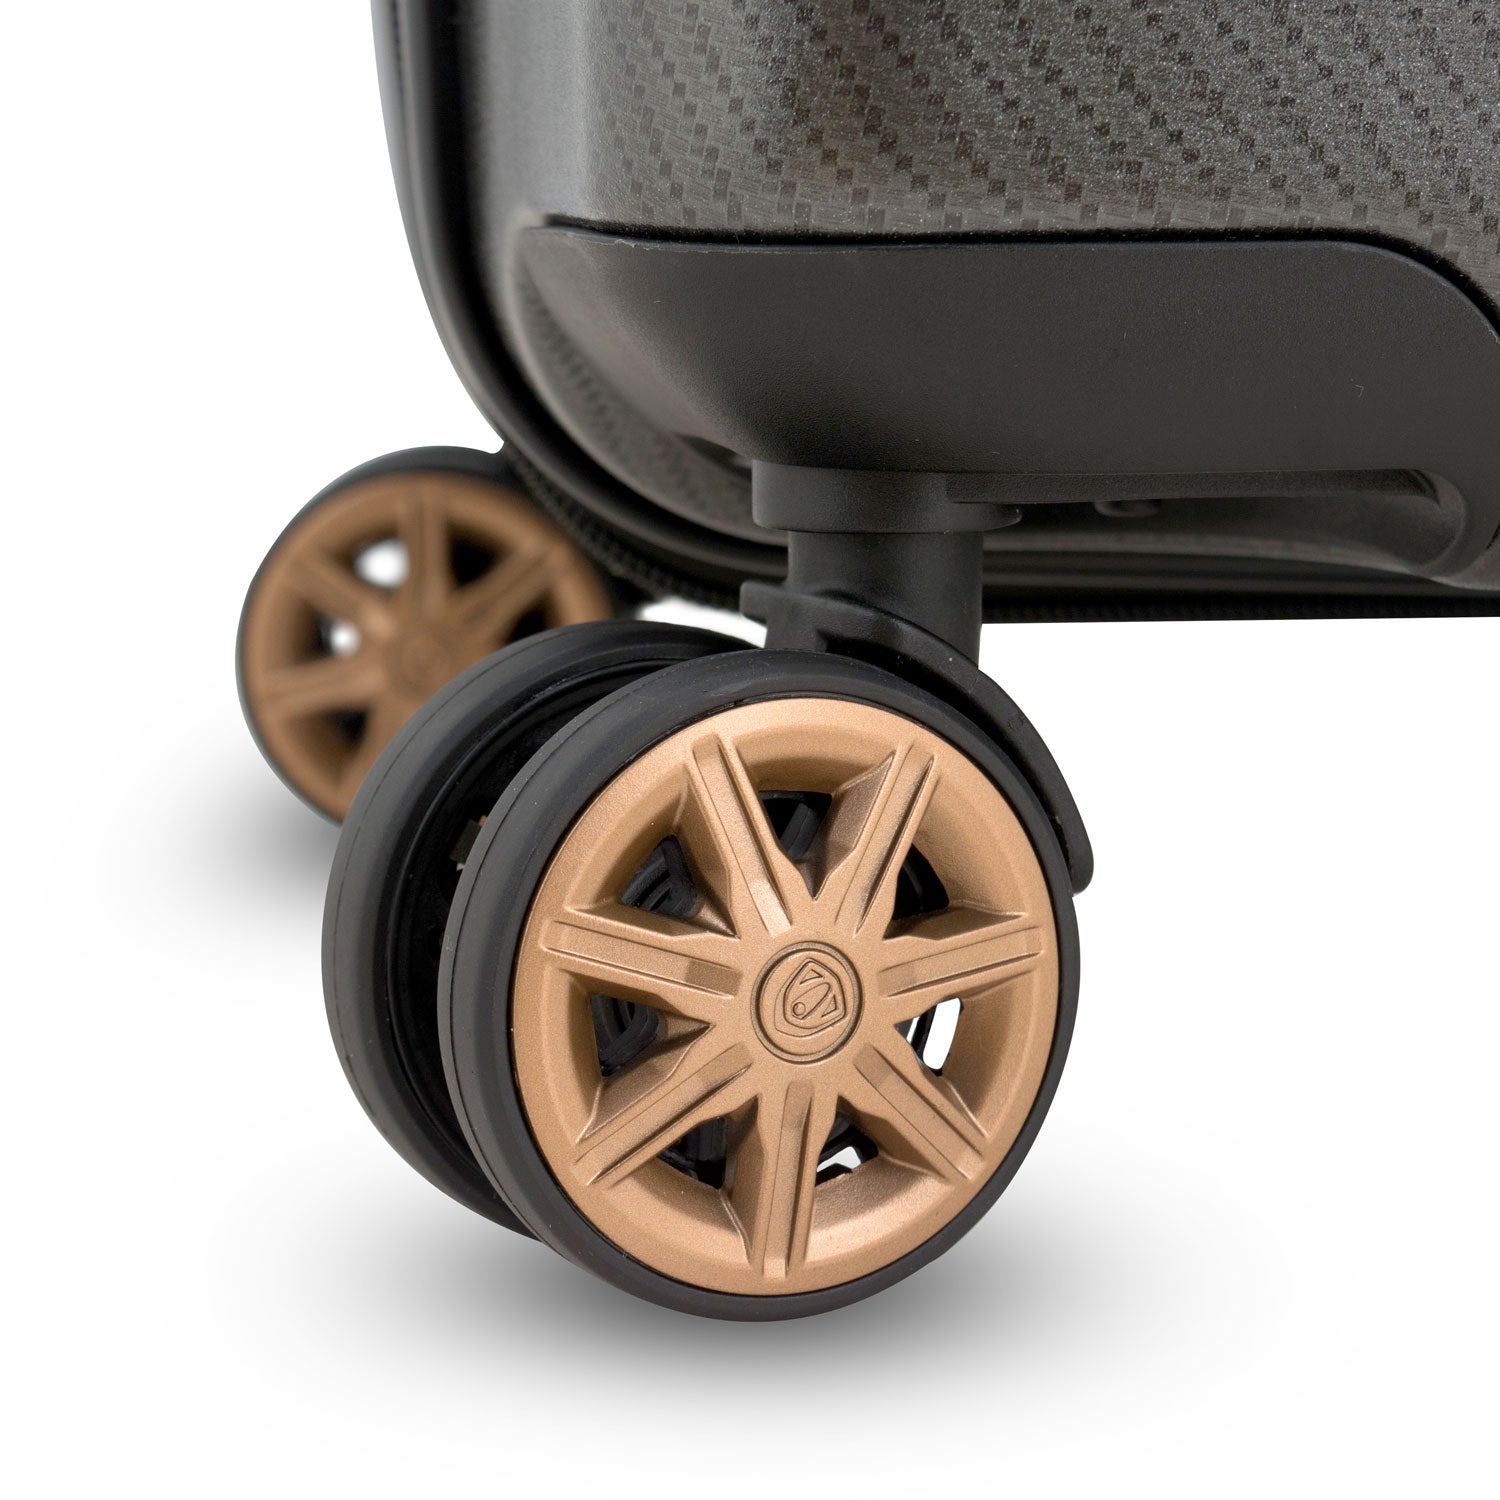 An image of the gray luggage with golden wheels.